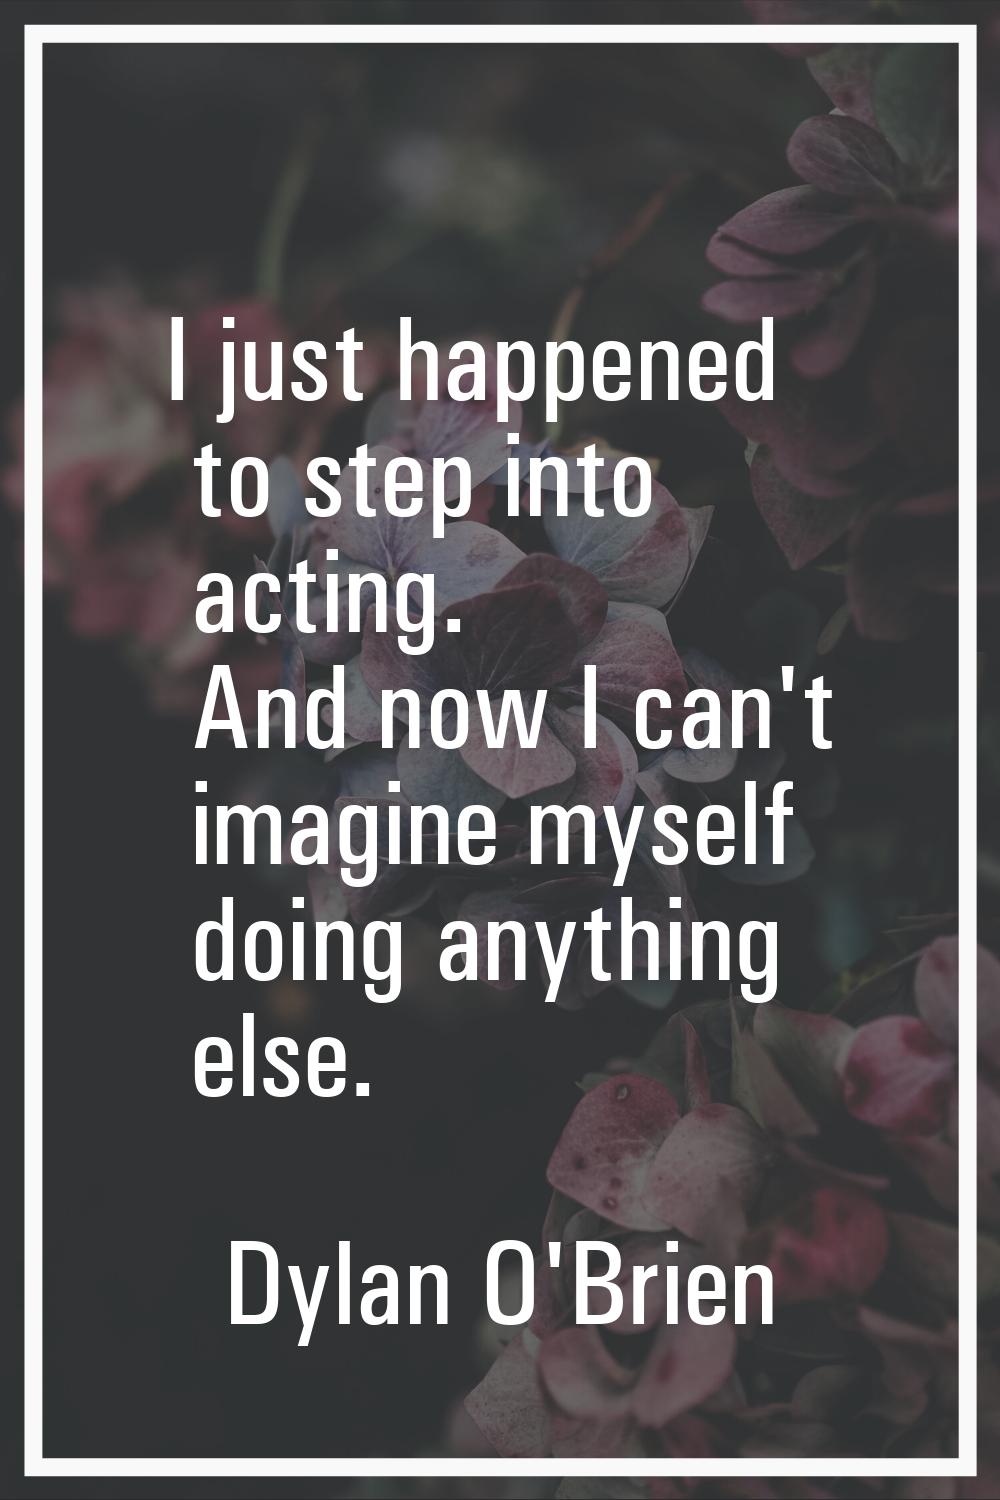 I just happened to step into acting. And now I can't imagine myself doing anything else.